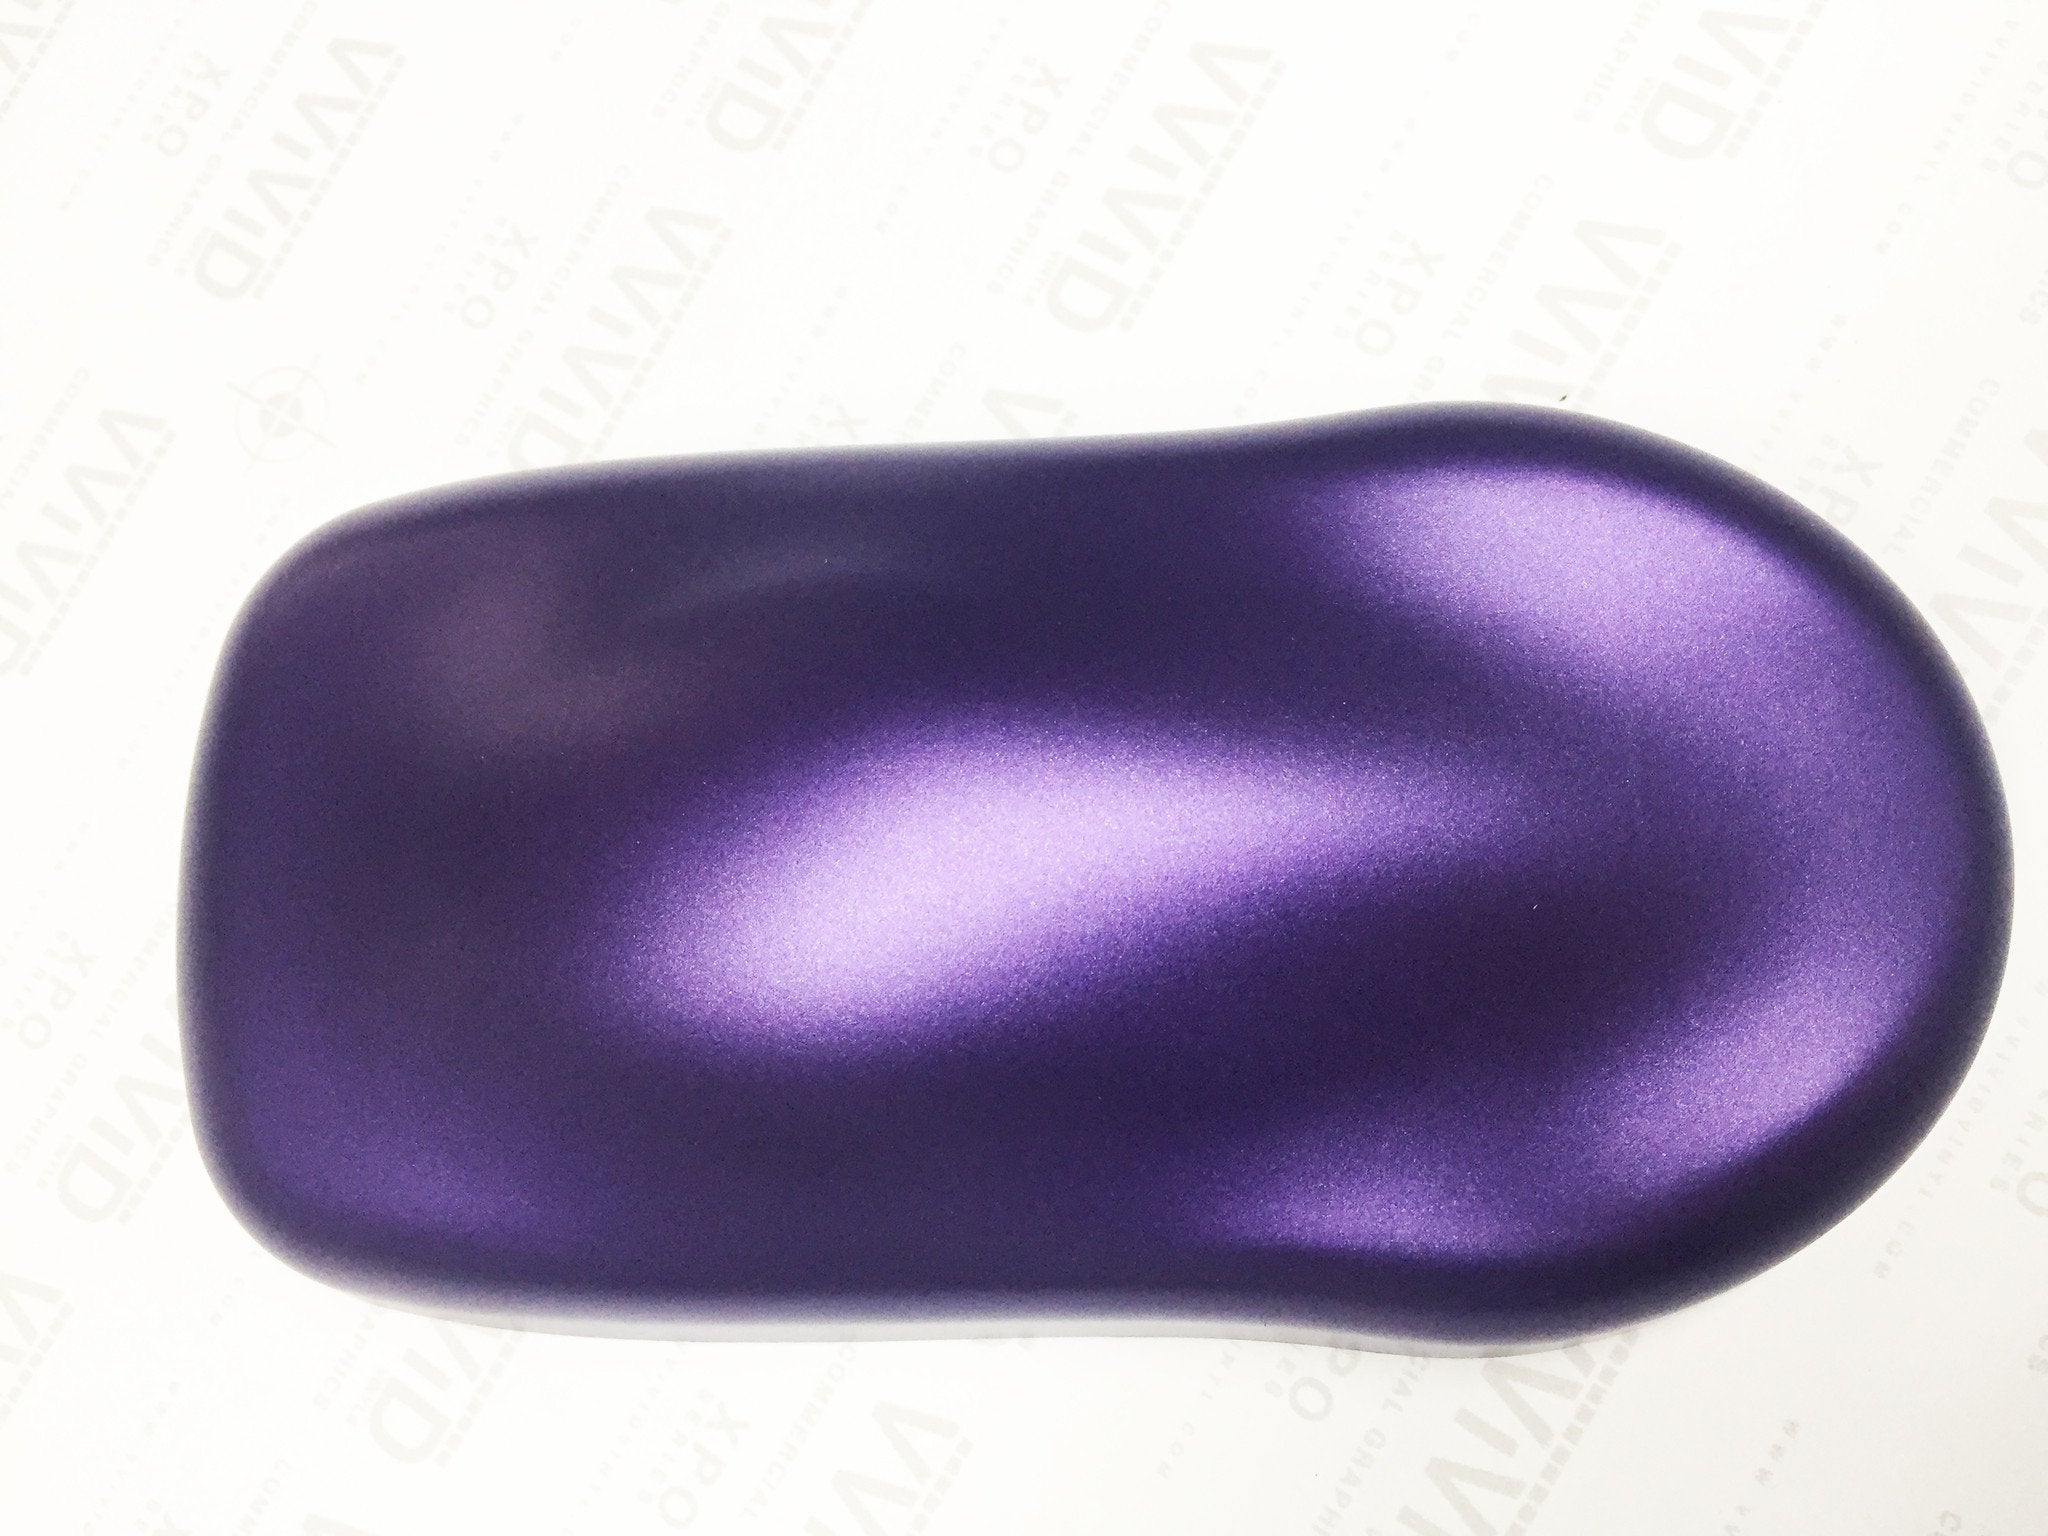 Matte Purple Car Wrap Vinyl Roll with Air Release Adhesive 3mil-VViViD8  (3ft x 5ft)